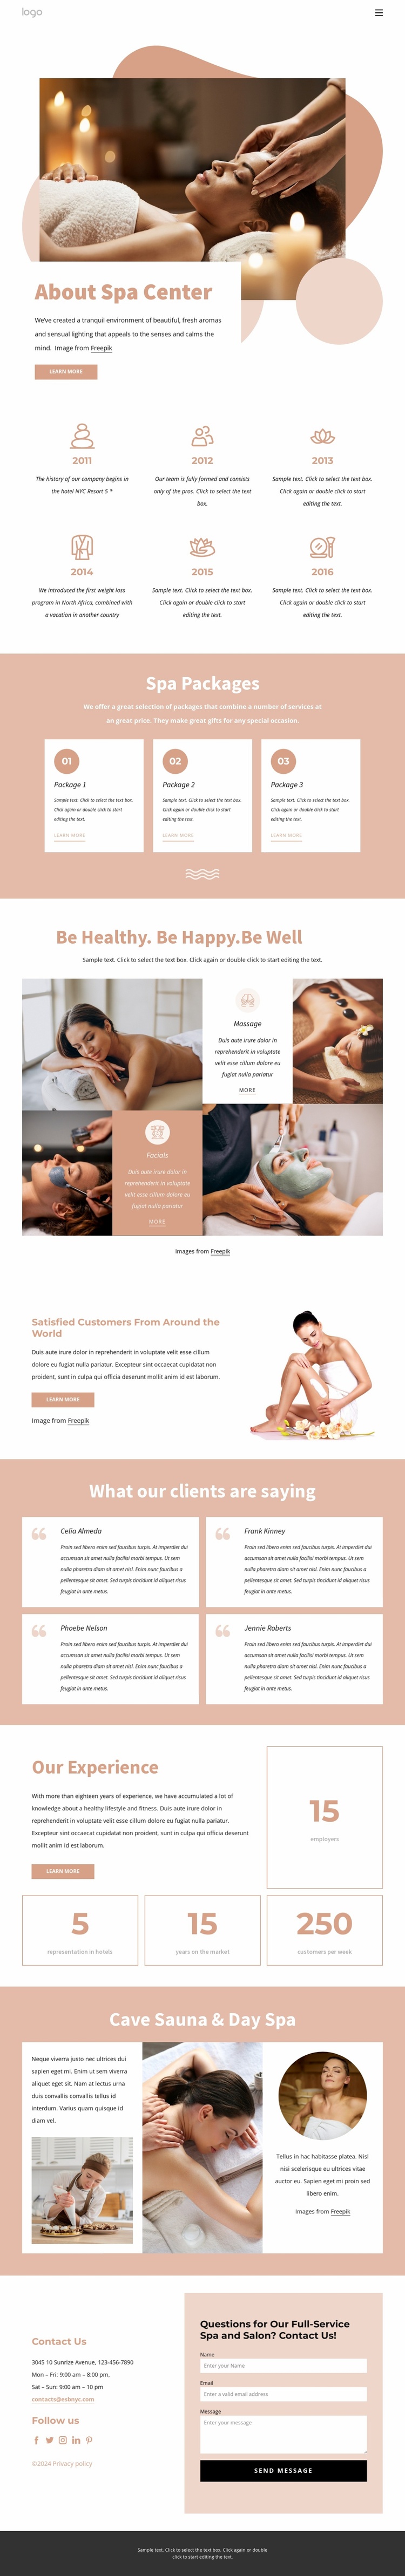 Keep your body, mind and soul balanced Ecommerce Website Design